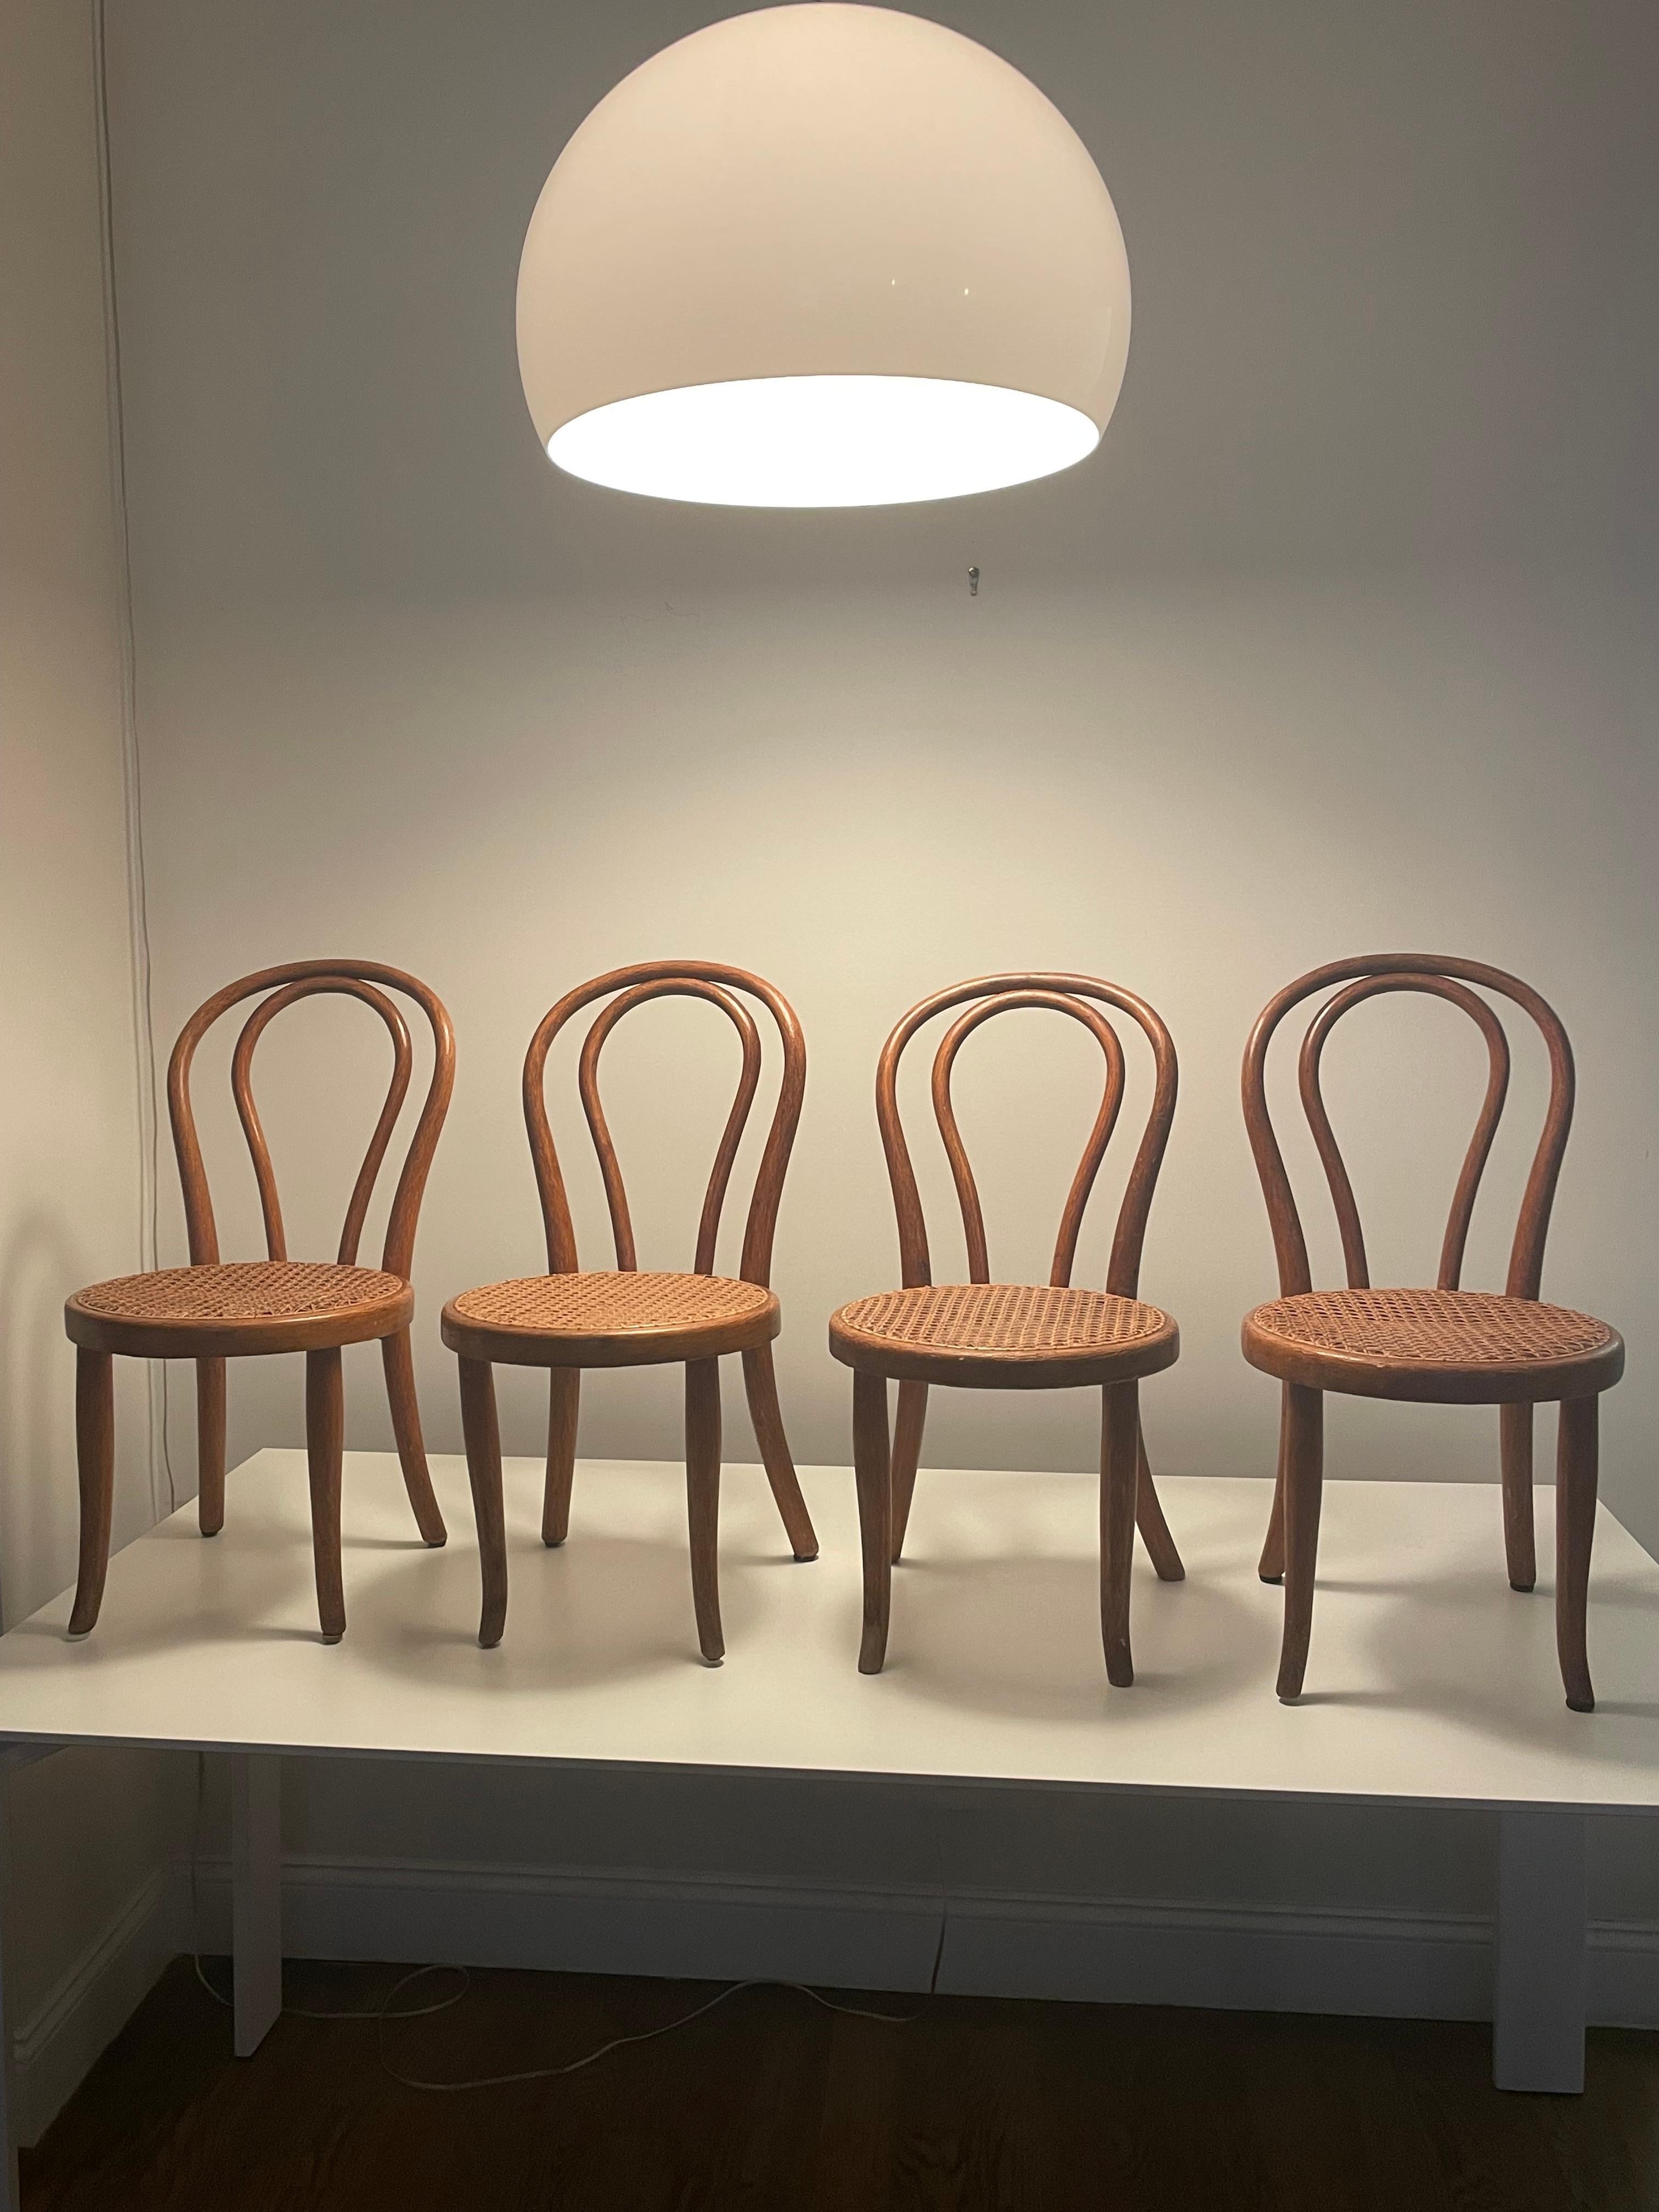 This set of four children's bentwood and cane chairs marked Thonet are early century and made in Austria . Very charming design and great for your vintage home decor or child’s playroom. Teach your children old world design while reading them